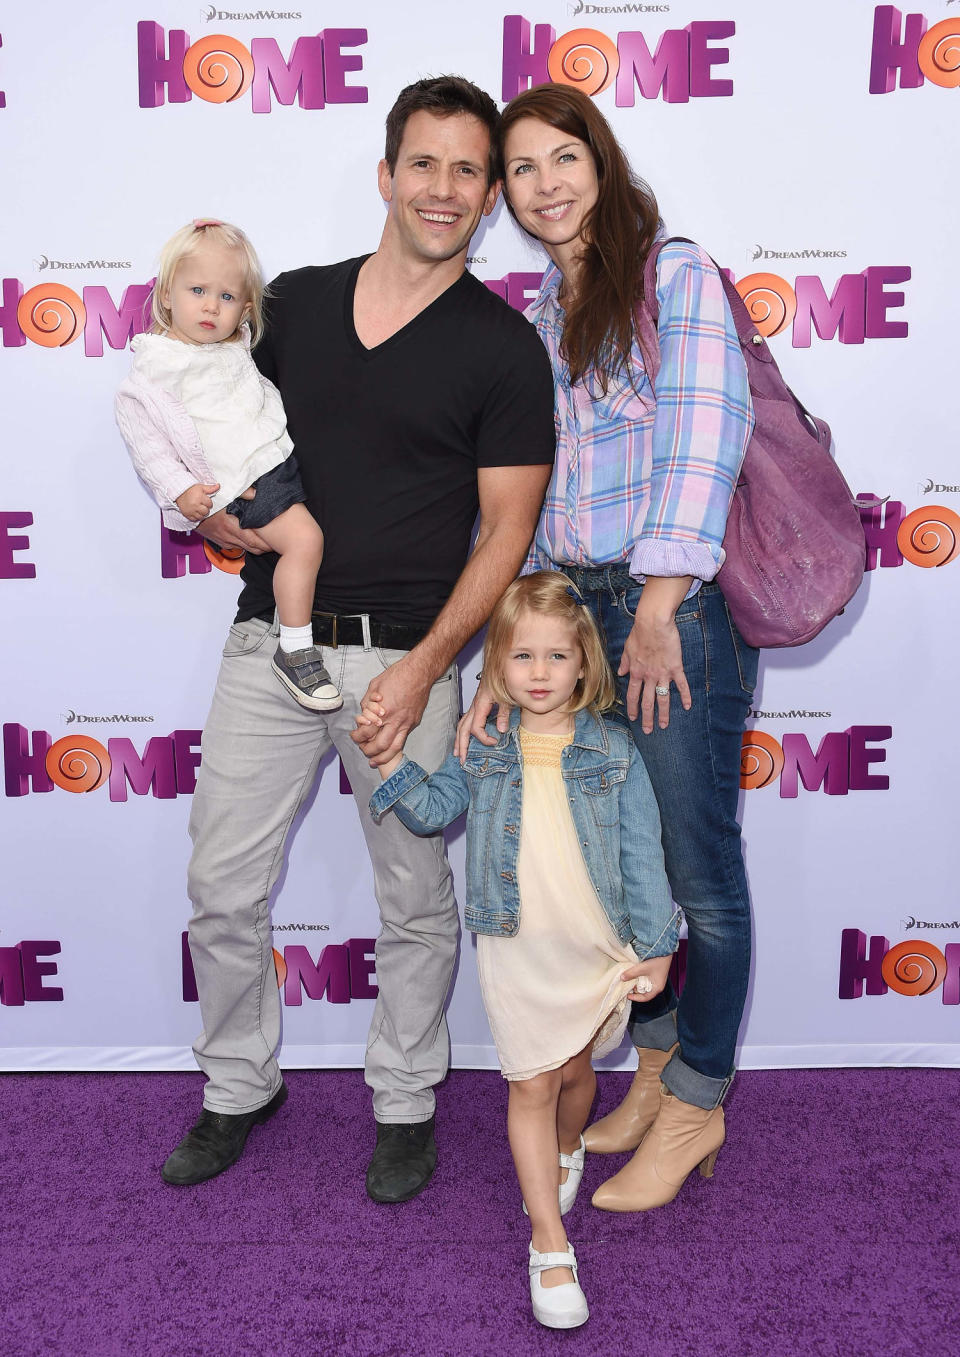 Christian Oliver, wife Christian Oliver and wife Jessica Klepser and their children. (Axelle/Bauer-Griffin / FilmMagic)